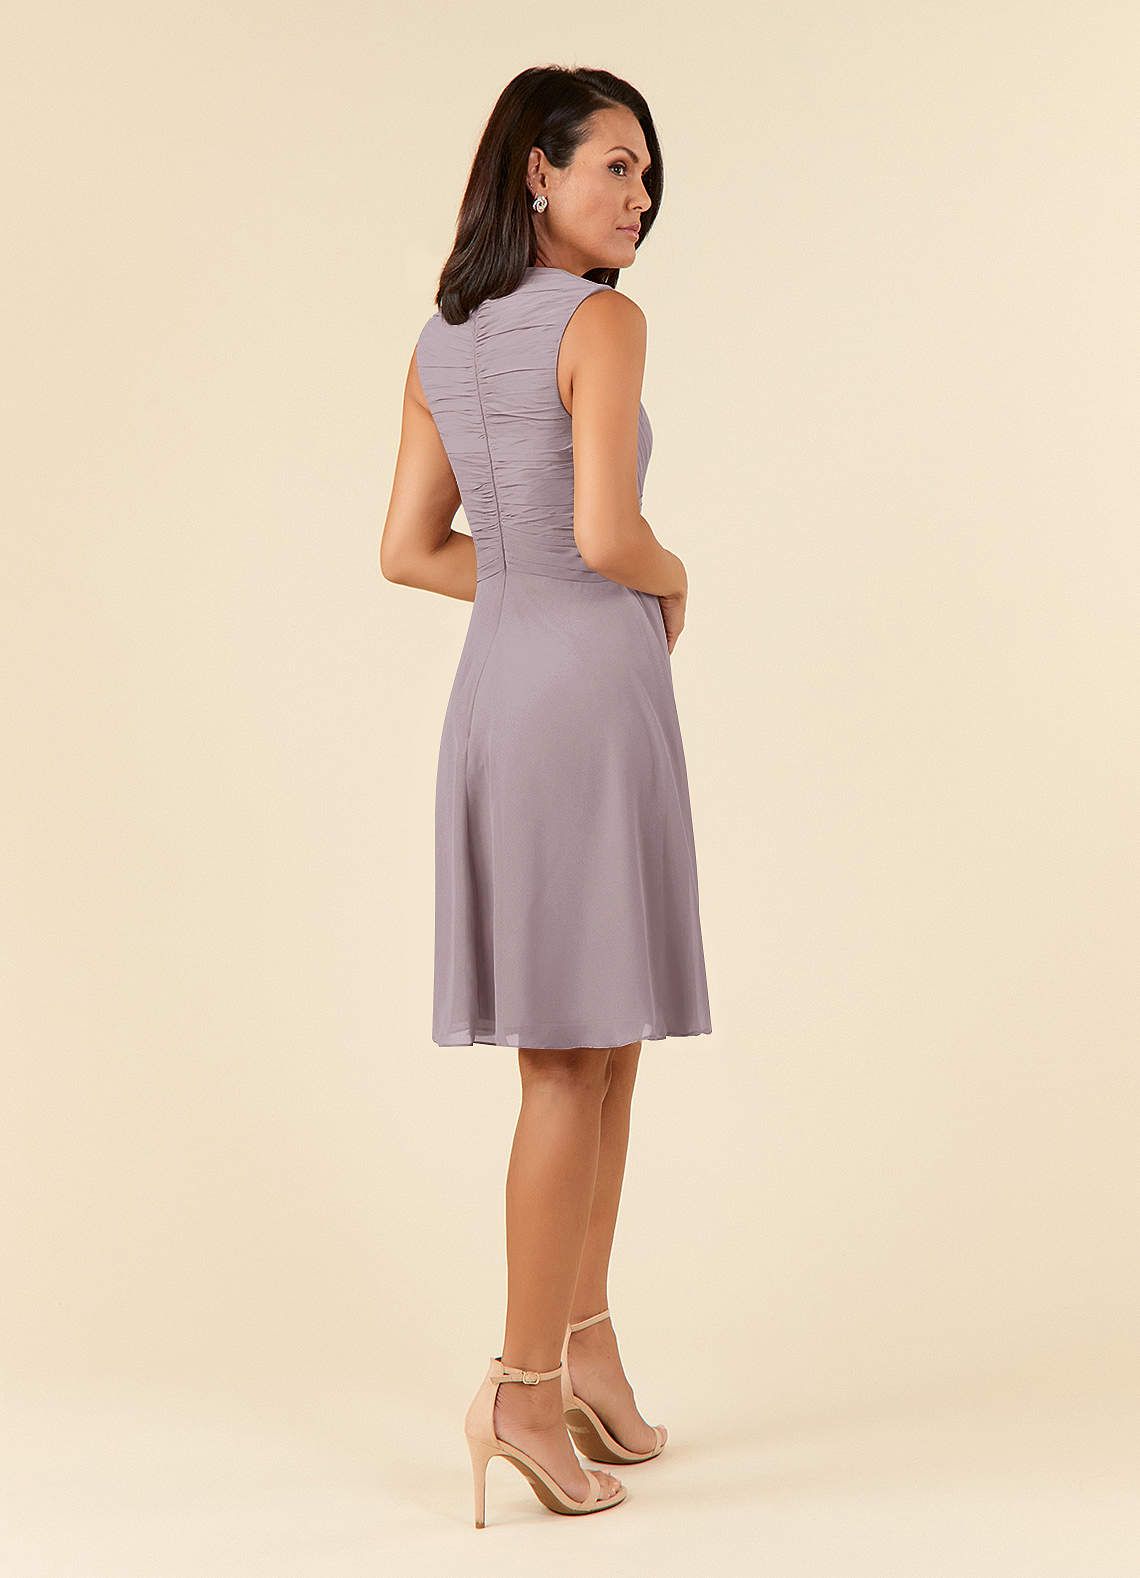 Azazie Theron Mother of the Bride Dresses A-Line V-Neck Pleated Chiffon Knee-Length Dress image1